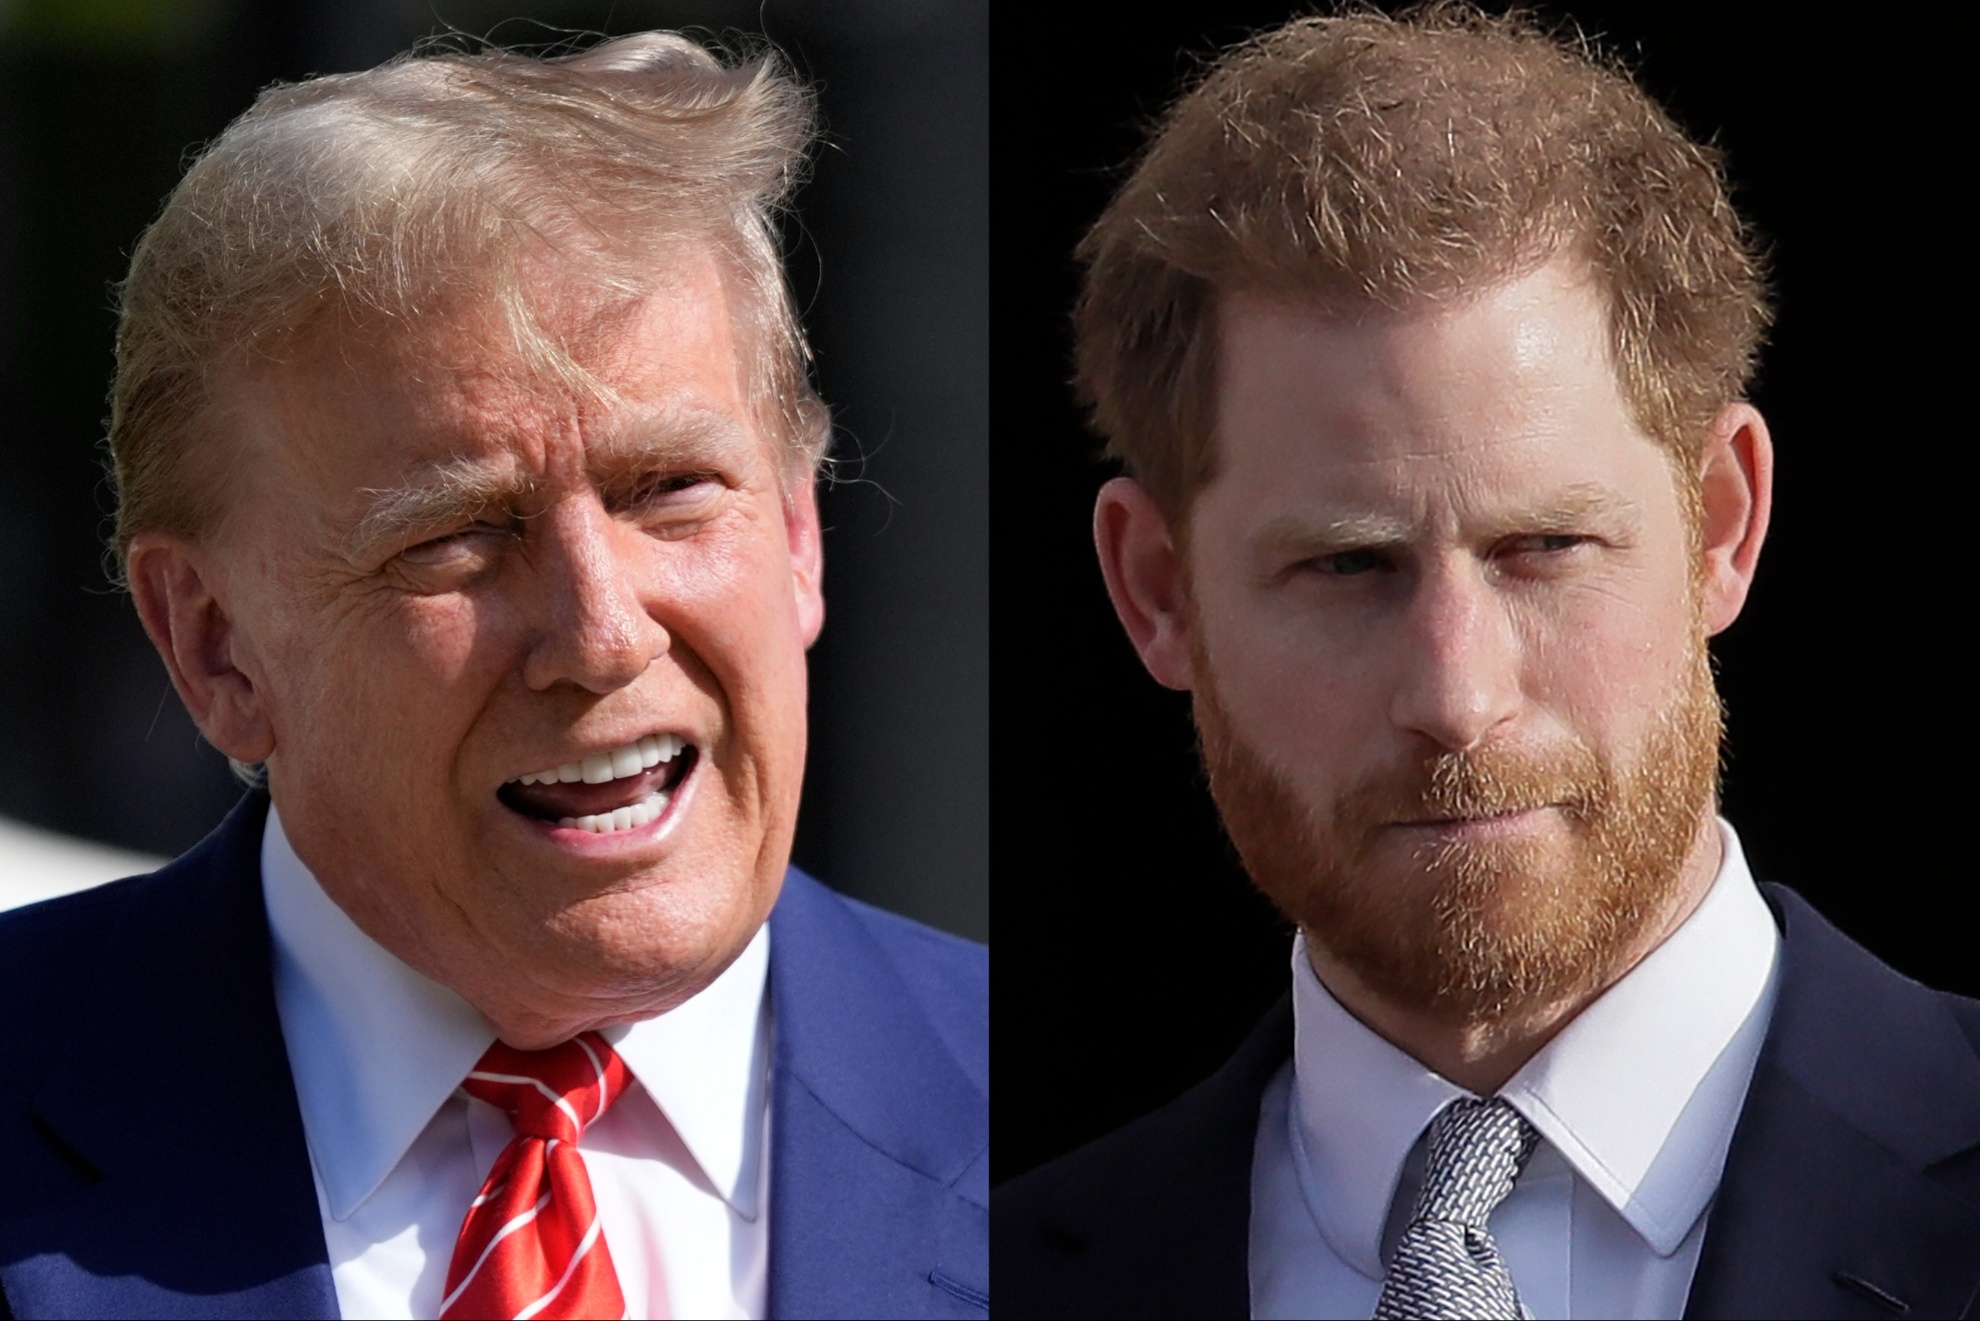 Former President Trump and Prince Harry.